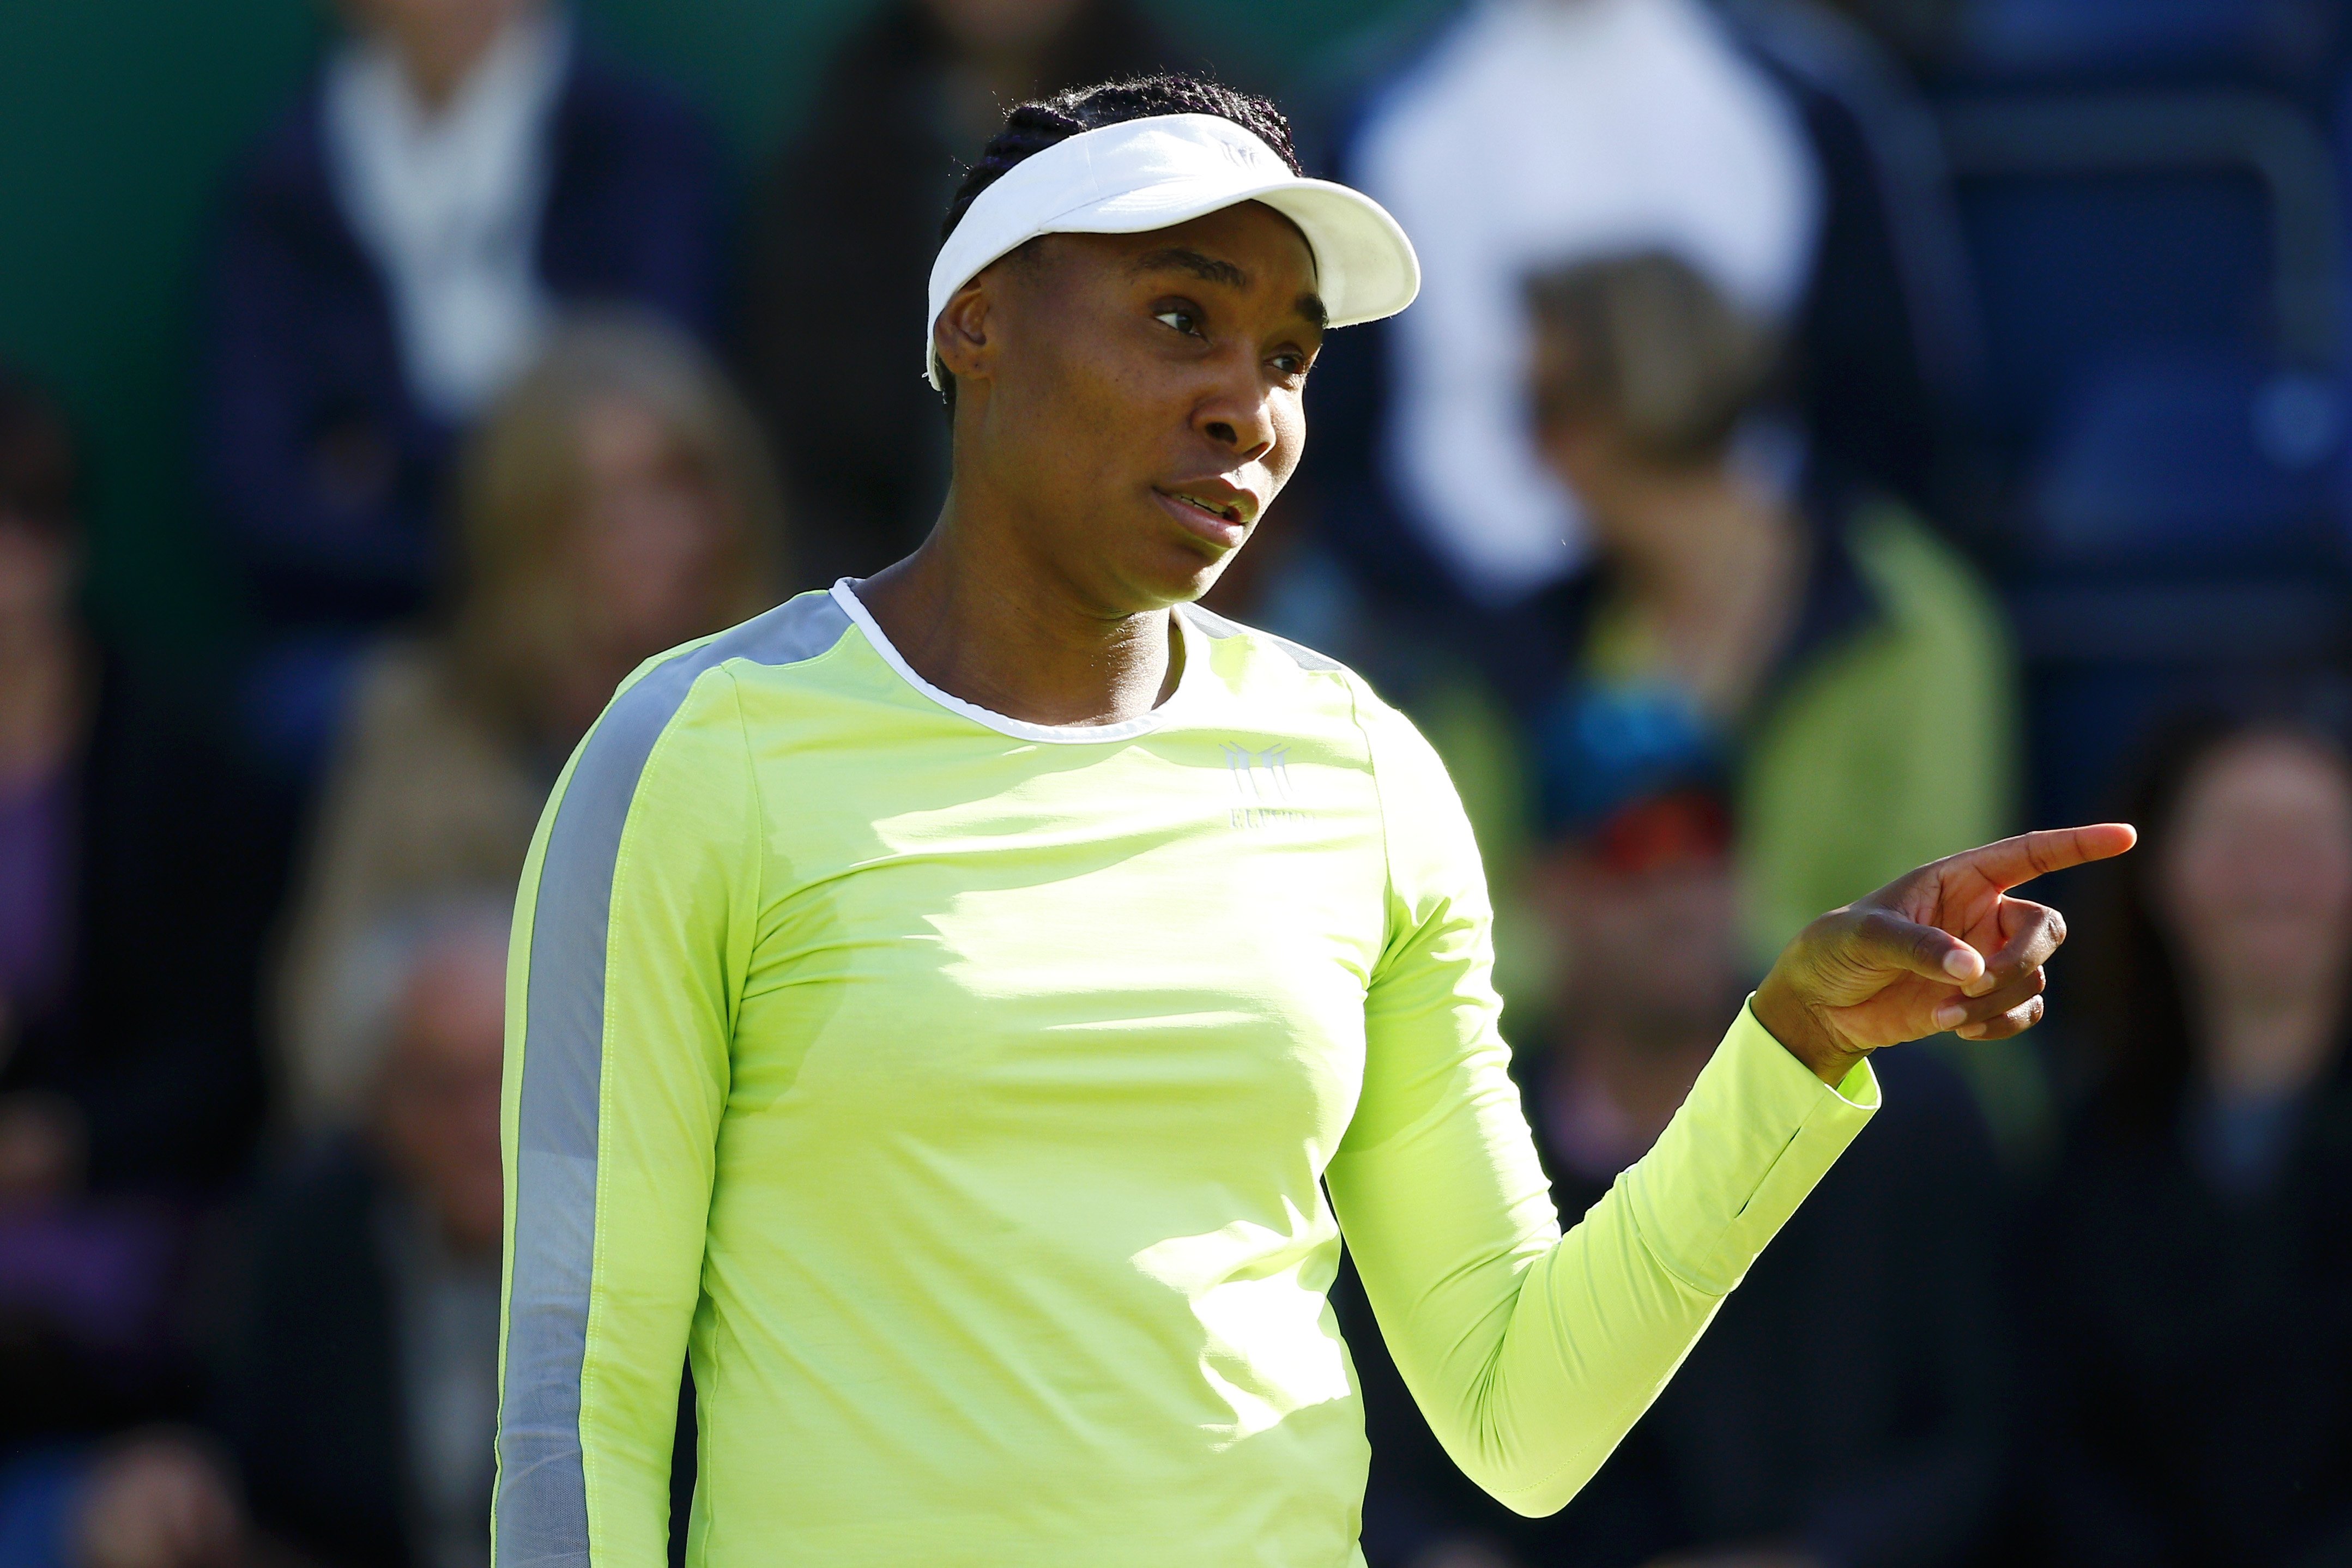 Venus Williams plays at the Nature Valley Classic at Edgbaston Priory Club on June 20, 2019. | Photo: Getty Images